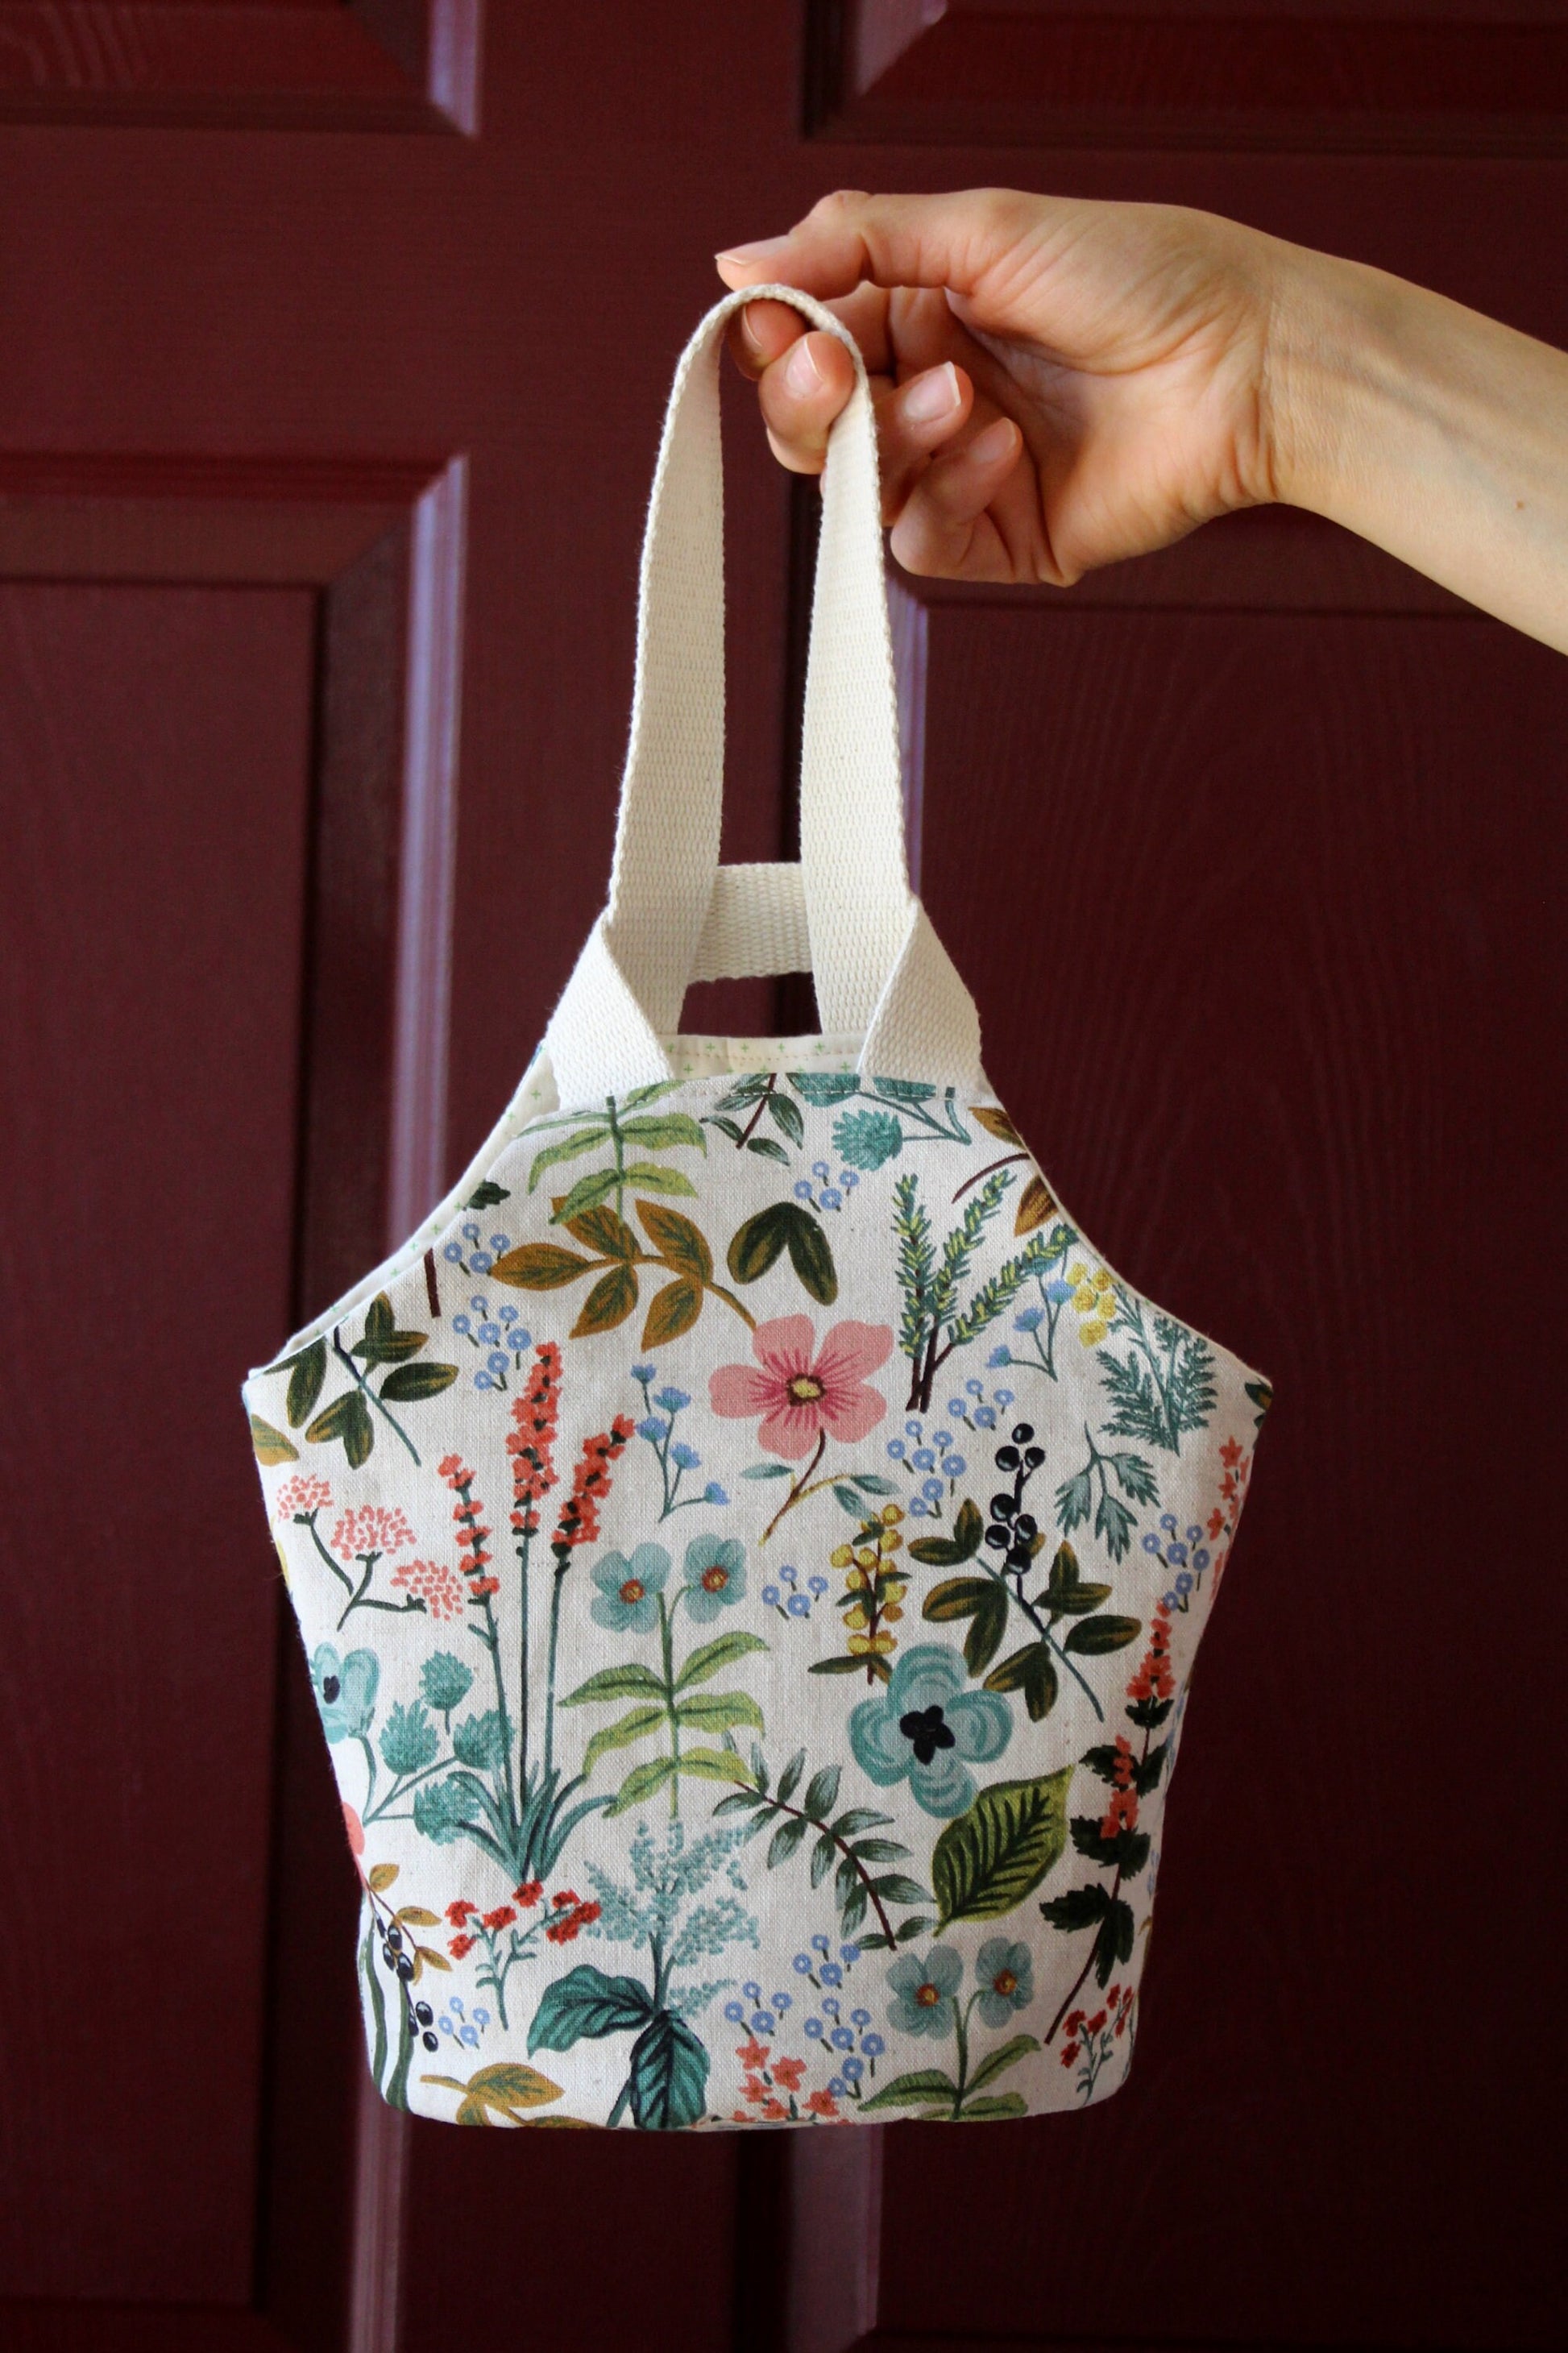 Tote Sewing Pattern • Take-Along Tote Reversible Knitting Project Bag PDF Sewing Pattern • DIY Gift for Sewists Easy Sewing Pattern